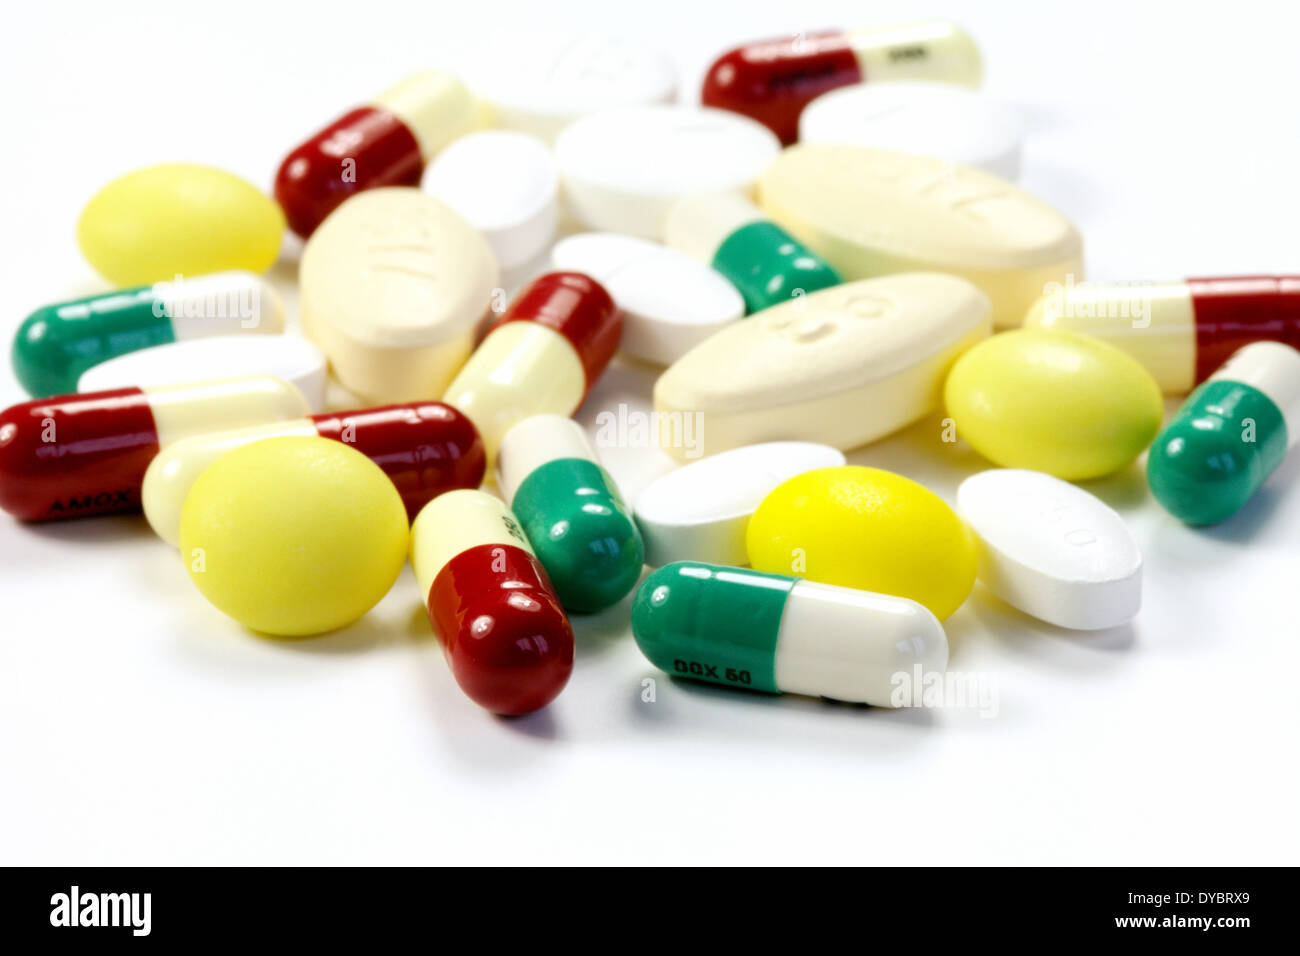 Antibiotics - a mixture of antibiotic capsules and tablets on a white background, UK Stock Photo